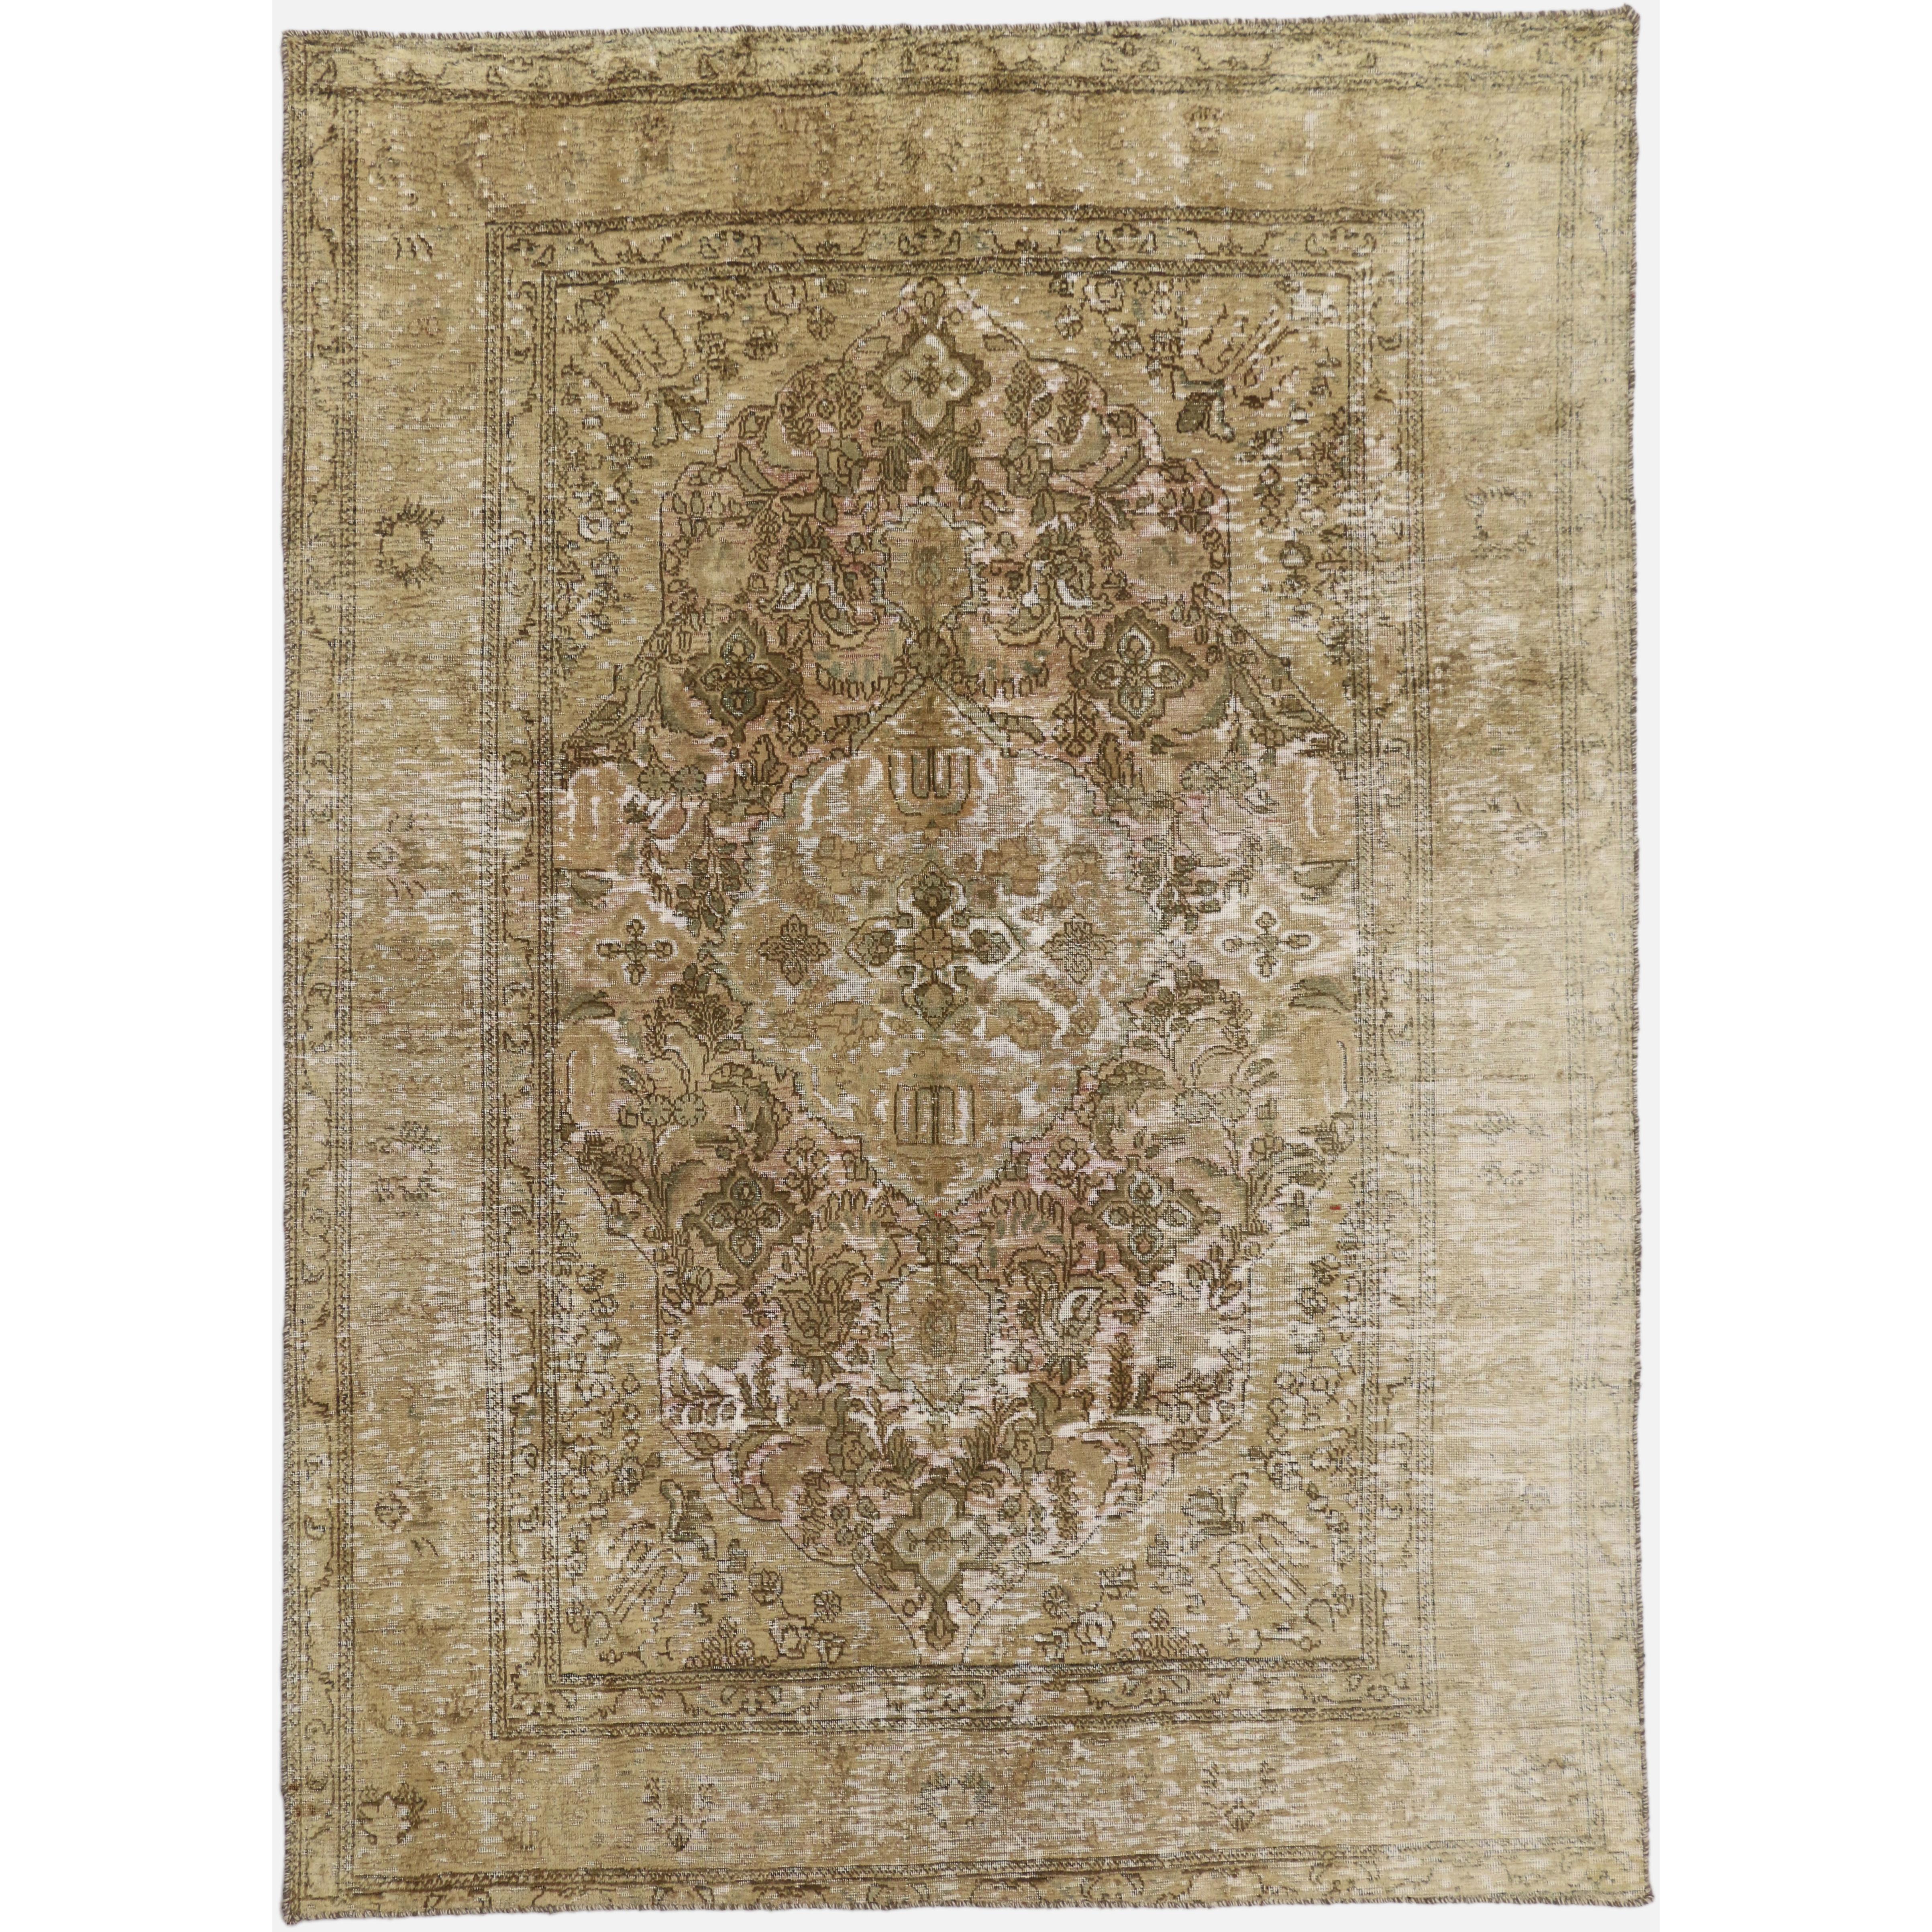 Distressed Vintage Persian Overdyed Rug with Rustic French Industrial Style